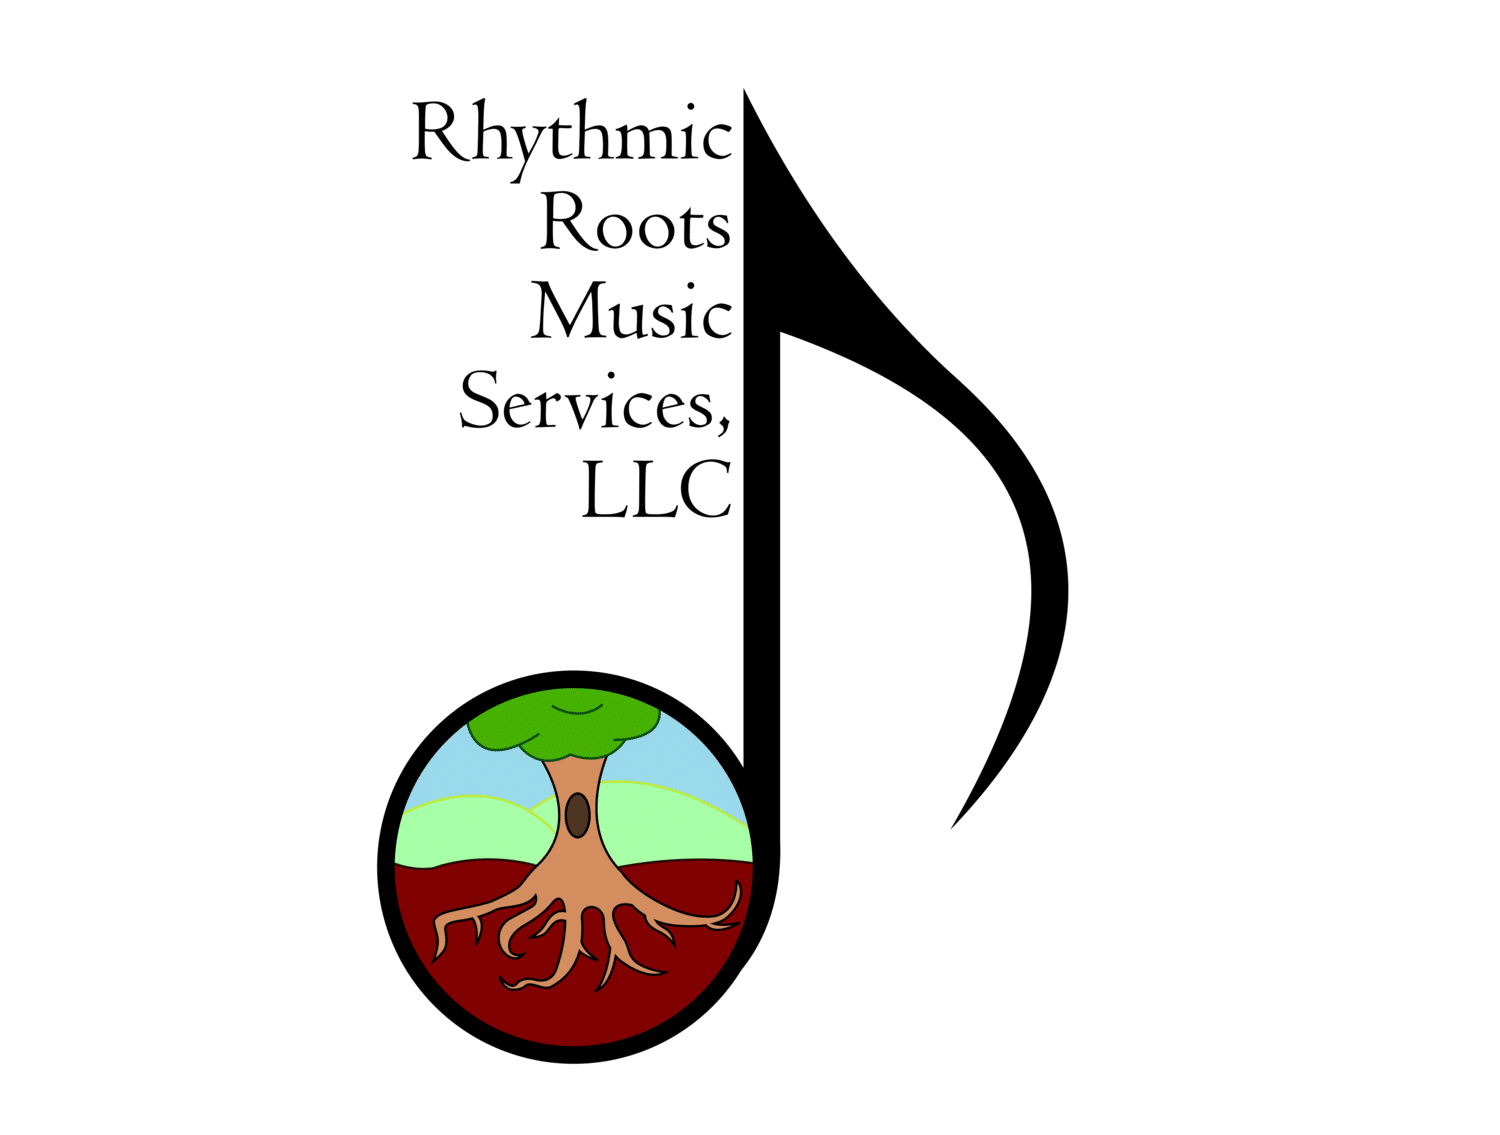 Rhythmic Roots Music Services